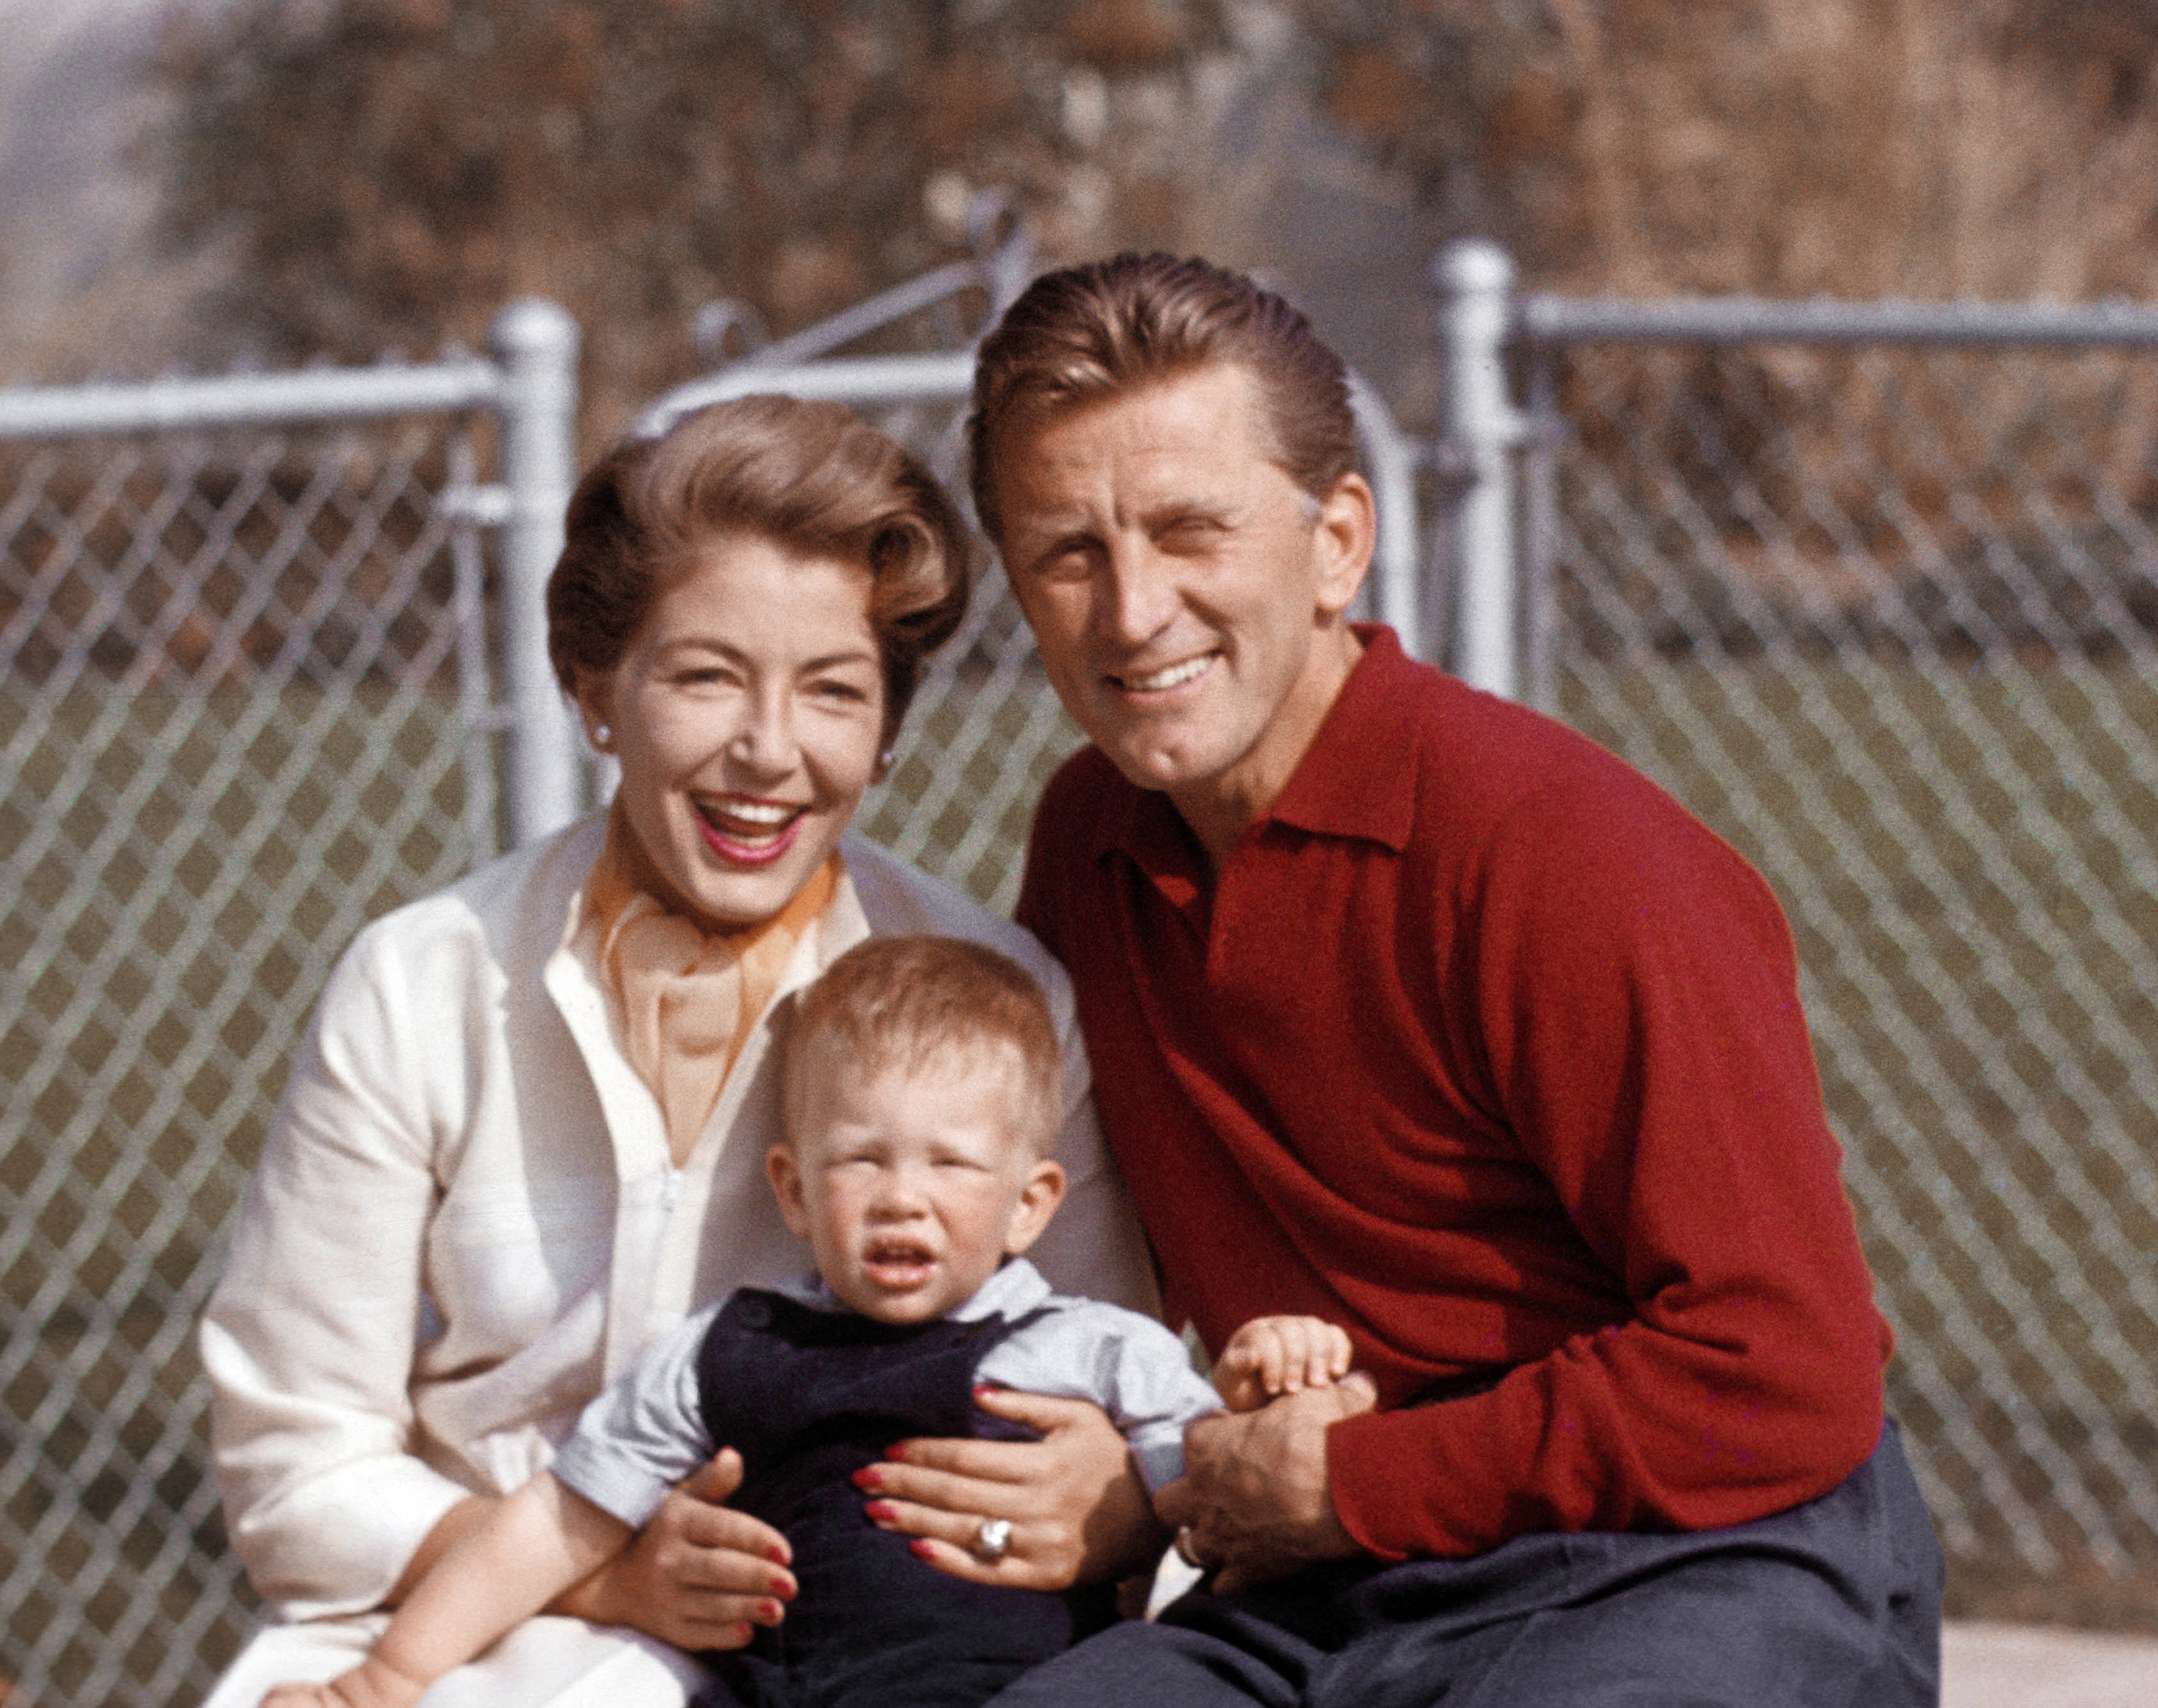 Kirk Douglas at home with his spouse Anne Douglas their son Peter Vincent Douglas on February 14, 1957 in Los Angeles | Photo: Getty Images